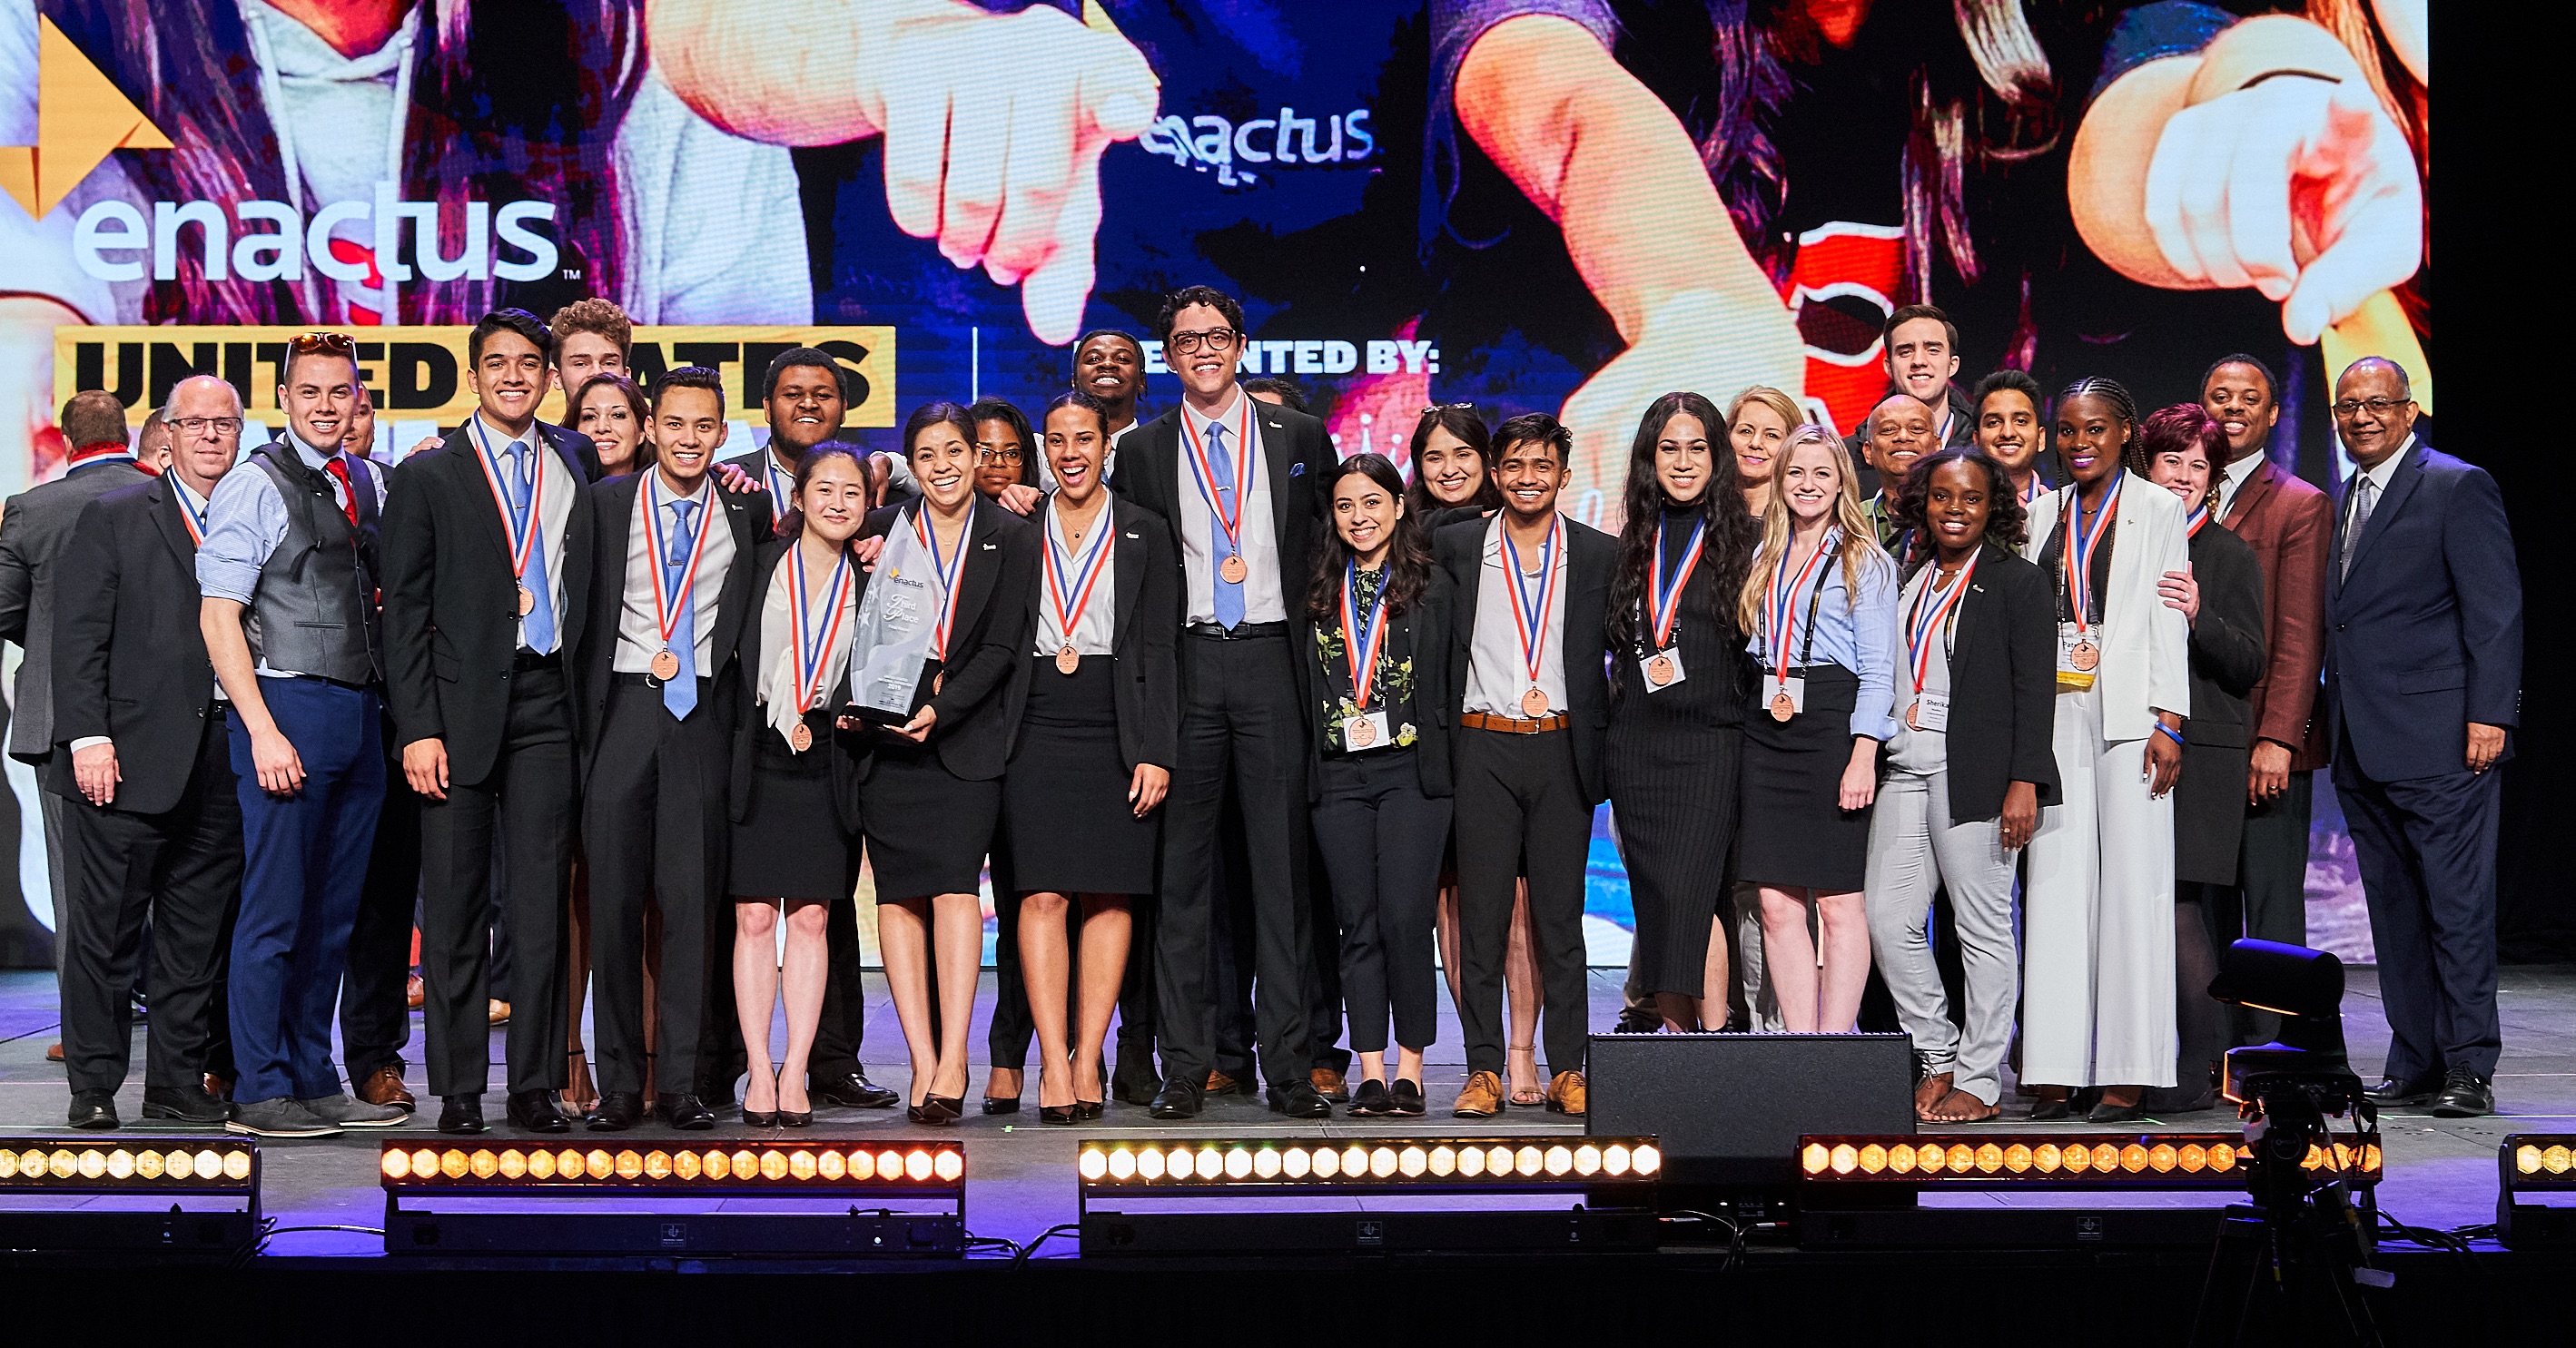 The La Sierra University Enactus team including national competition presenters and the eLibrary project team together on stage at the Enactus U.S. National Exposition, Kansas City Convention Center, Kansas City, Mo. with team members' parents, Zapara School of Business Dean John Thomas, far right, and business school Professor Jere Fox, far left.